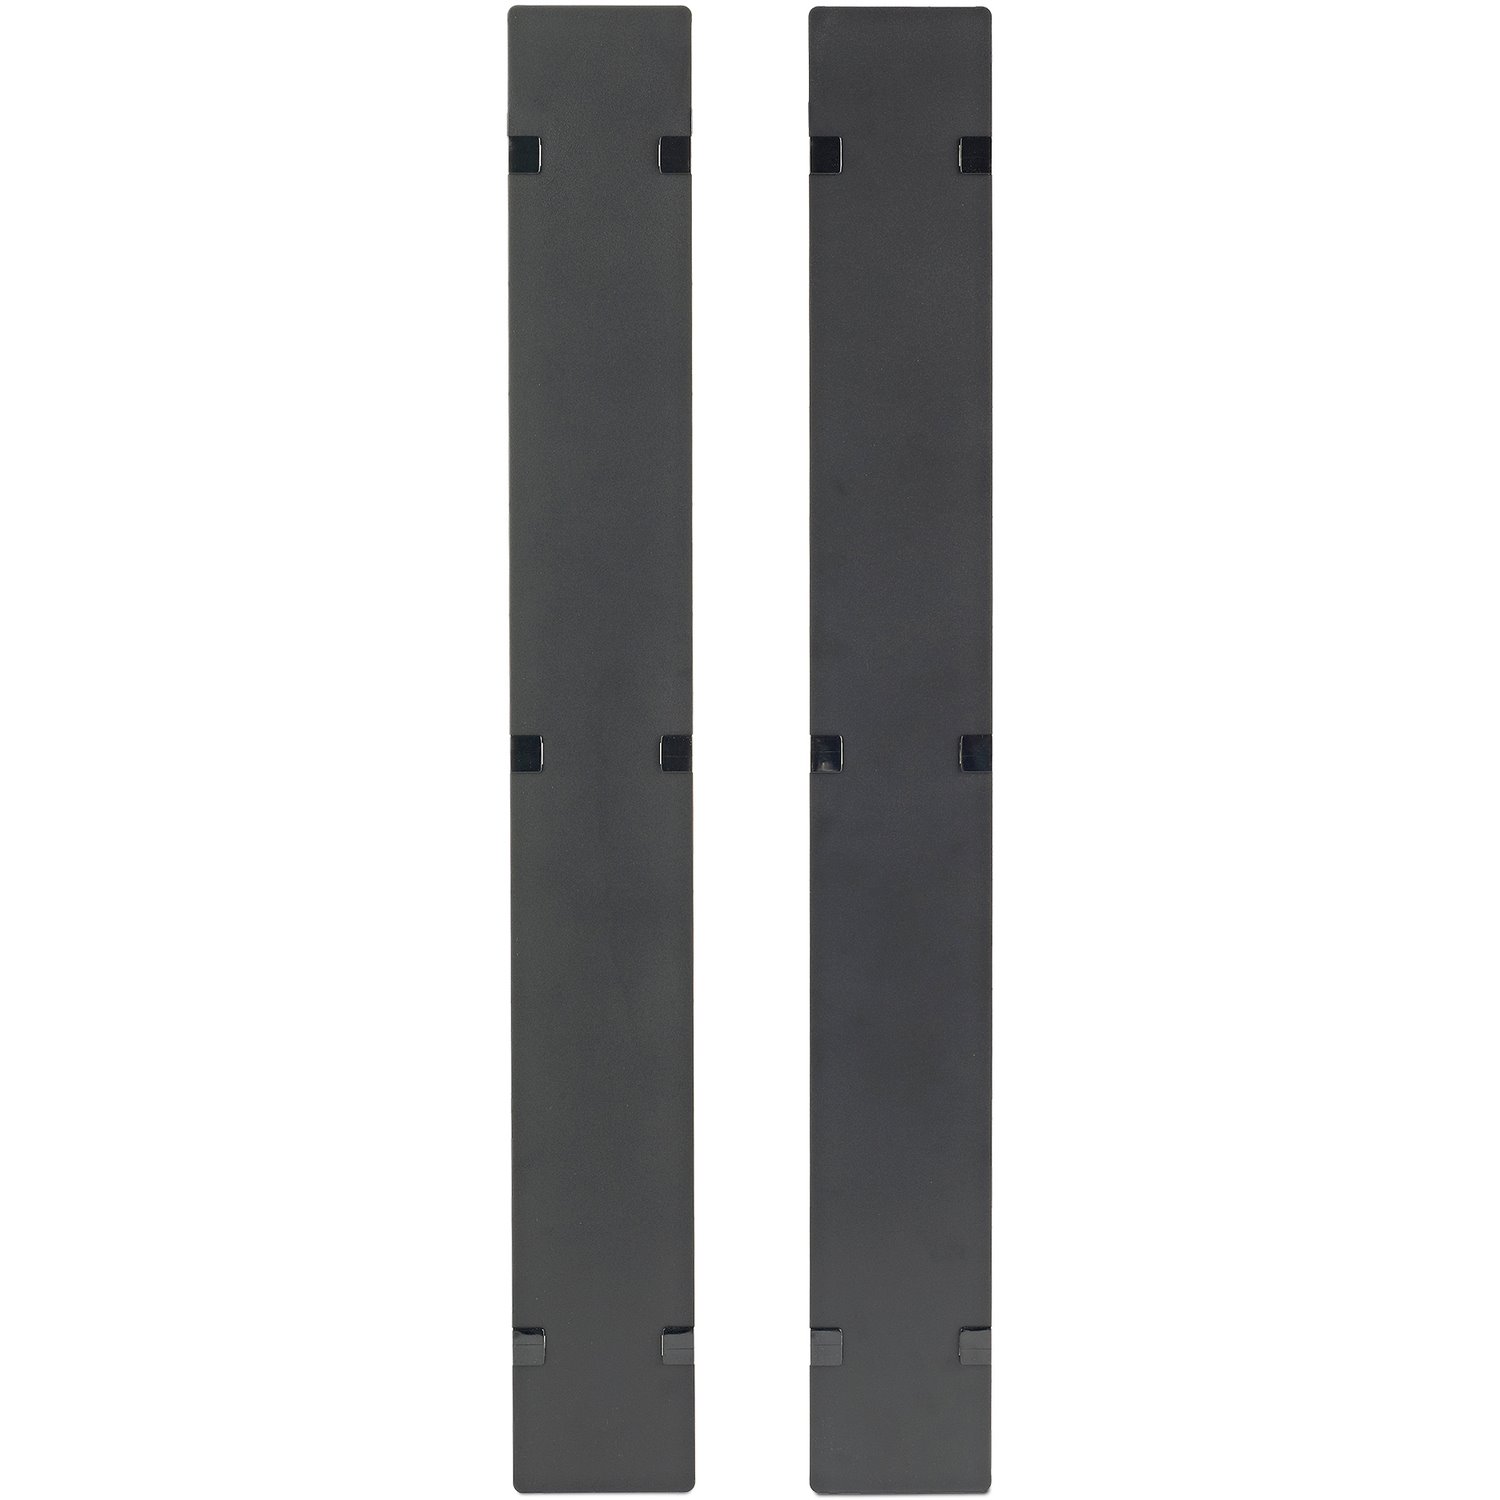 APC by Schneider Electric AR7589 Cable Organizer - Black - 2 Pack - TAA Compliant